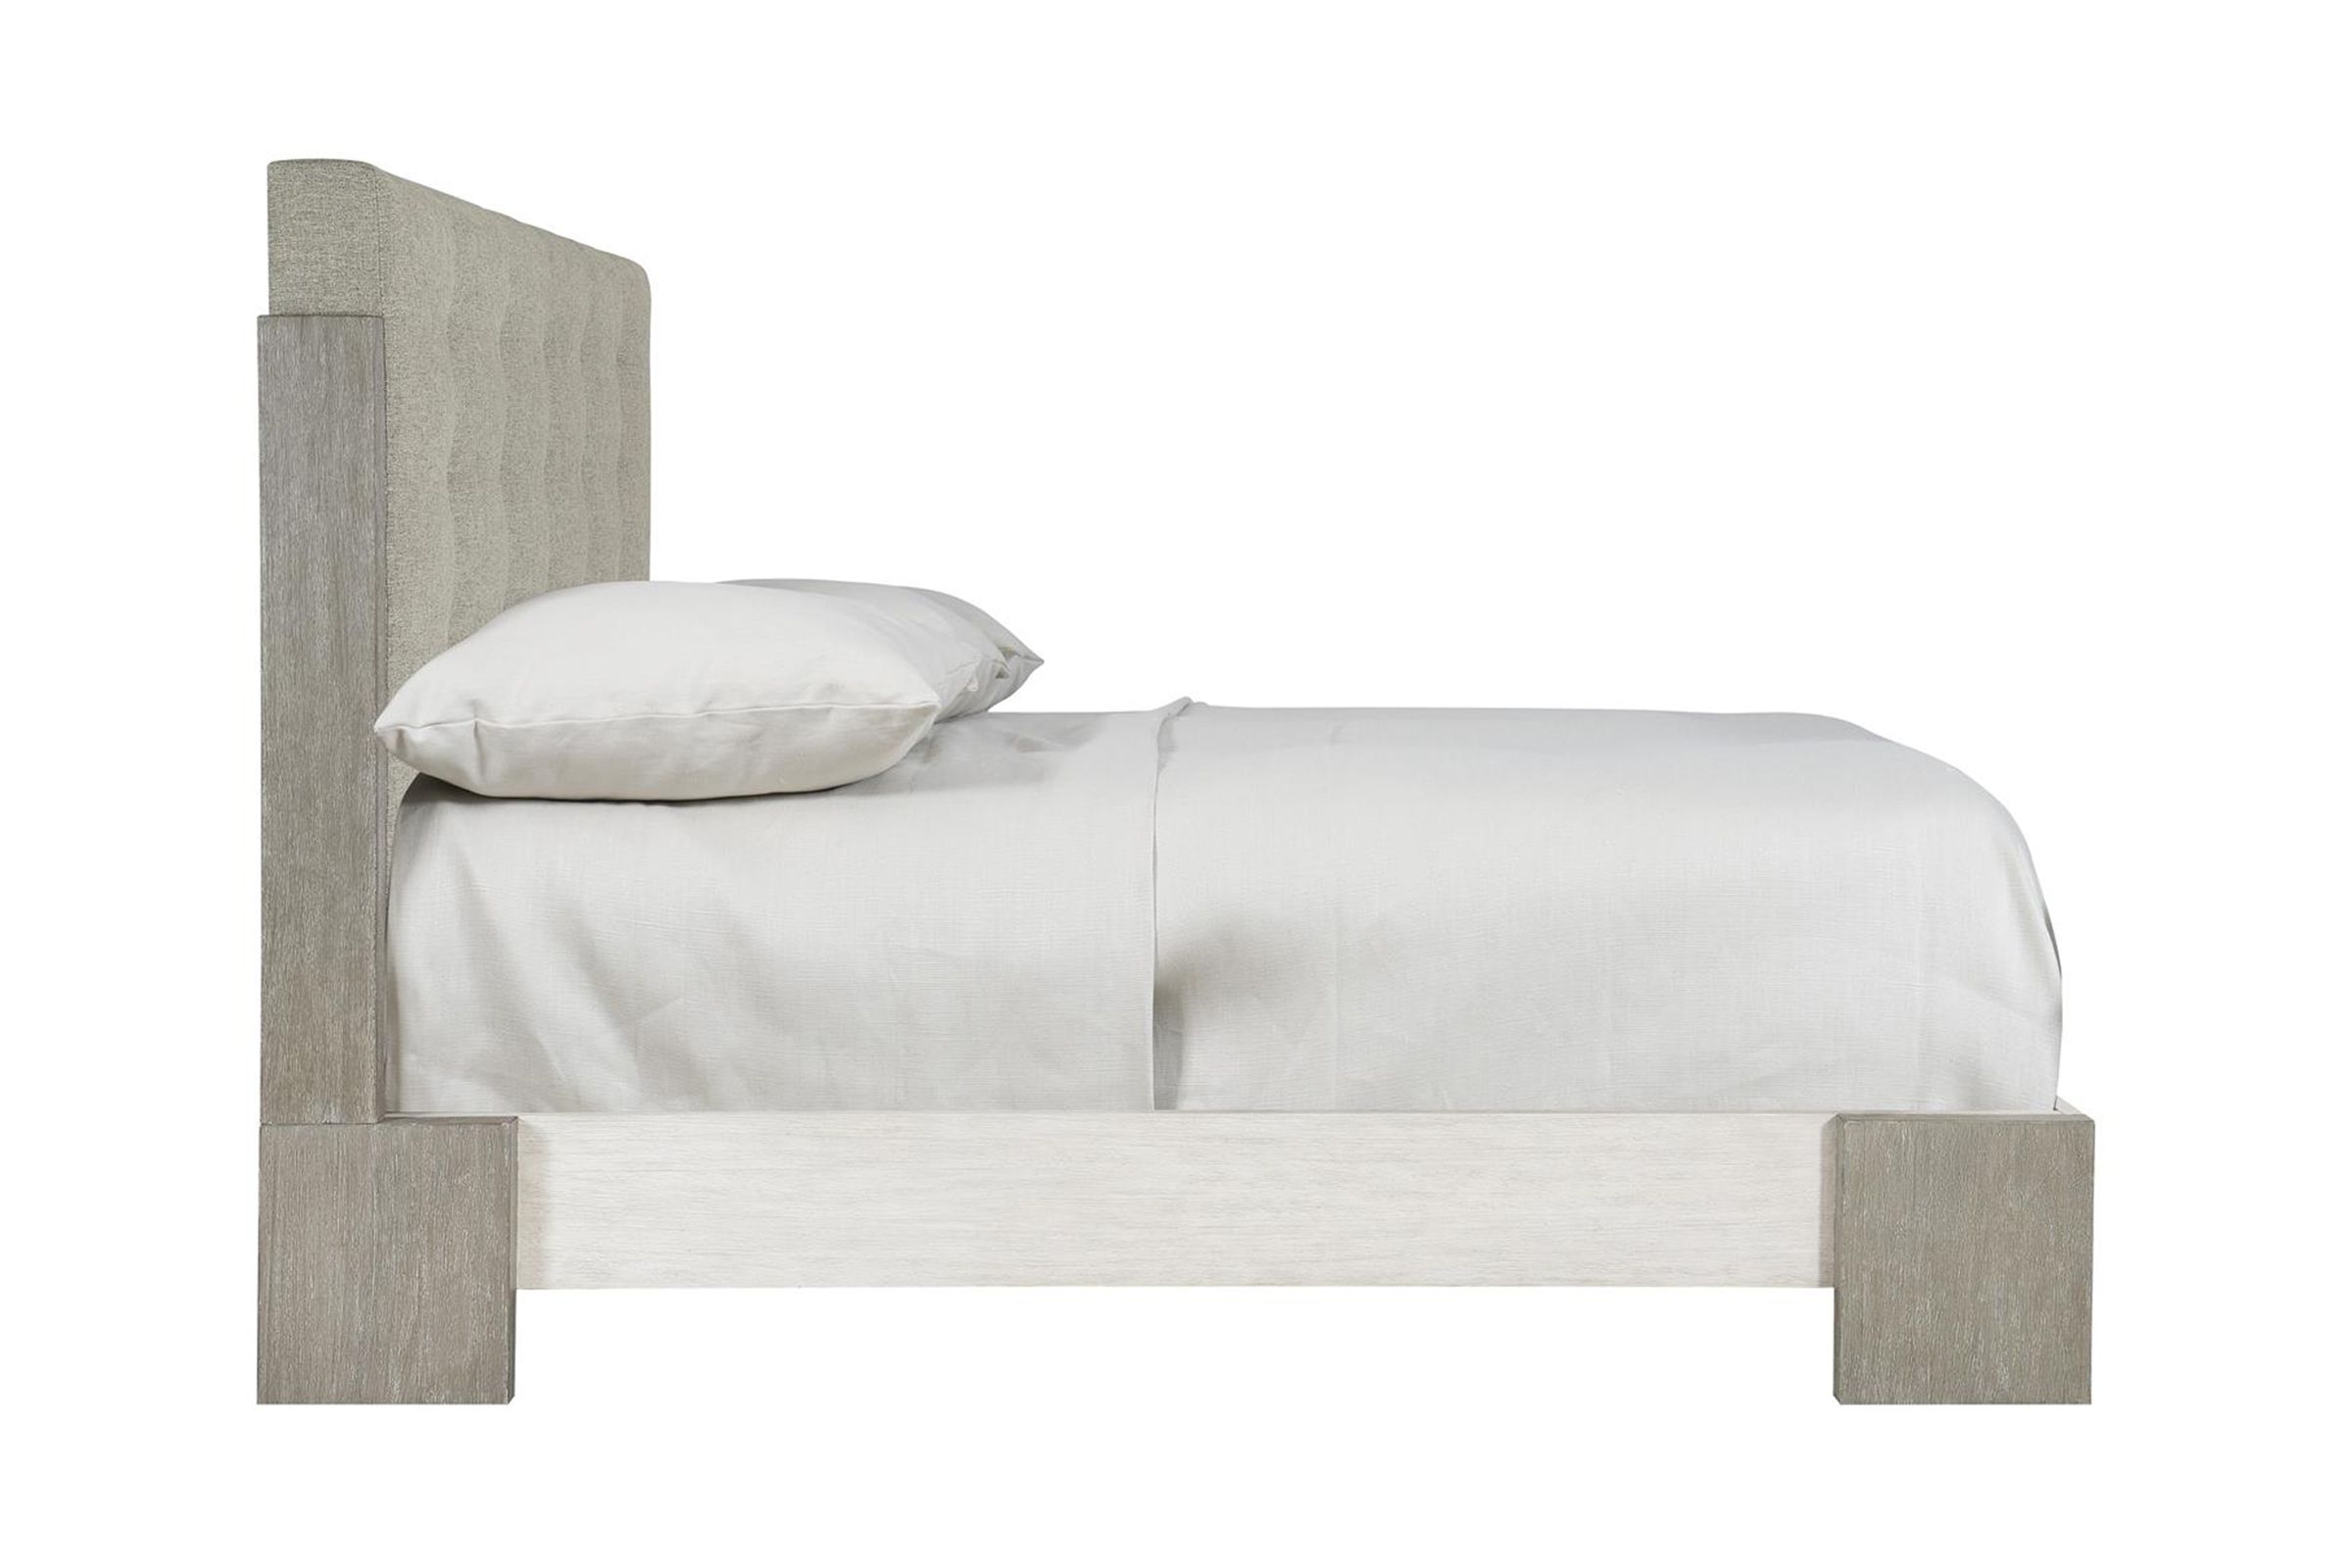 Foundations King Upholstered Bed by Bernhardt